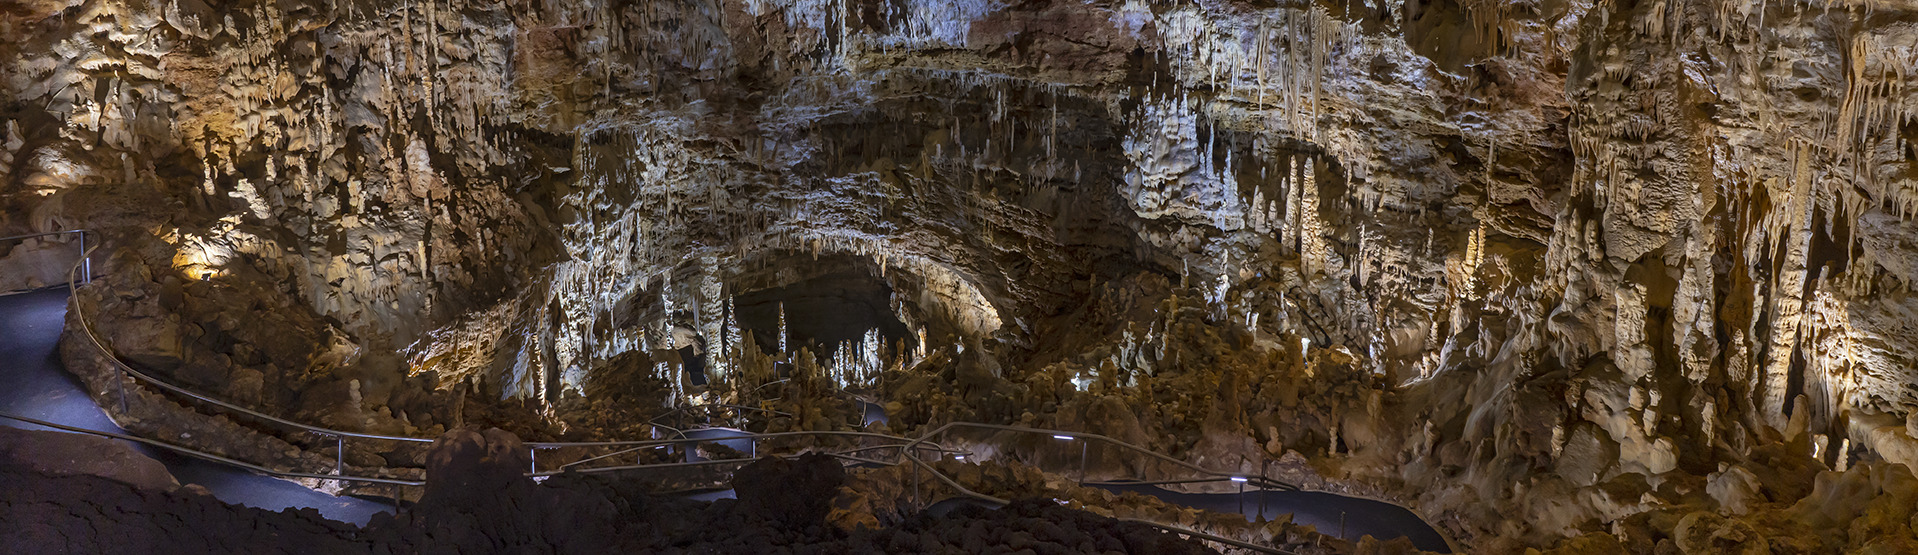 Overhead View of Hall of the Mountain King - Natural Bridge Caverns